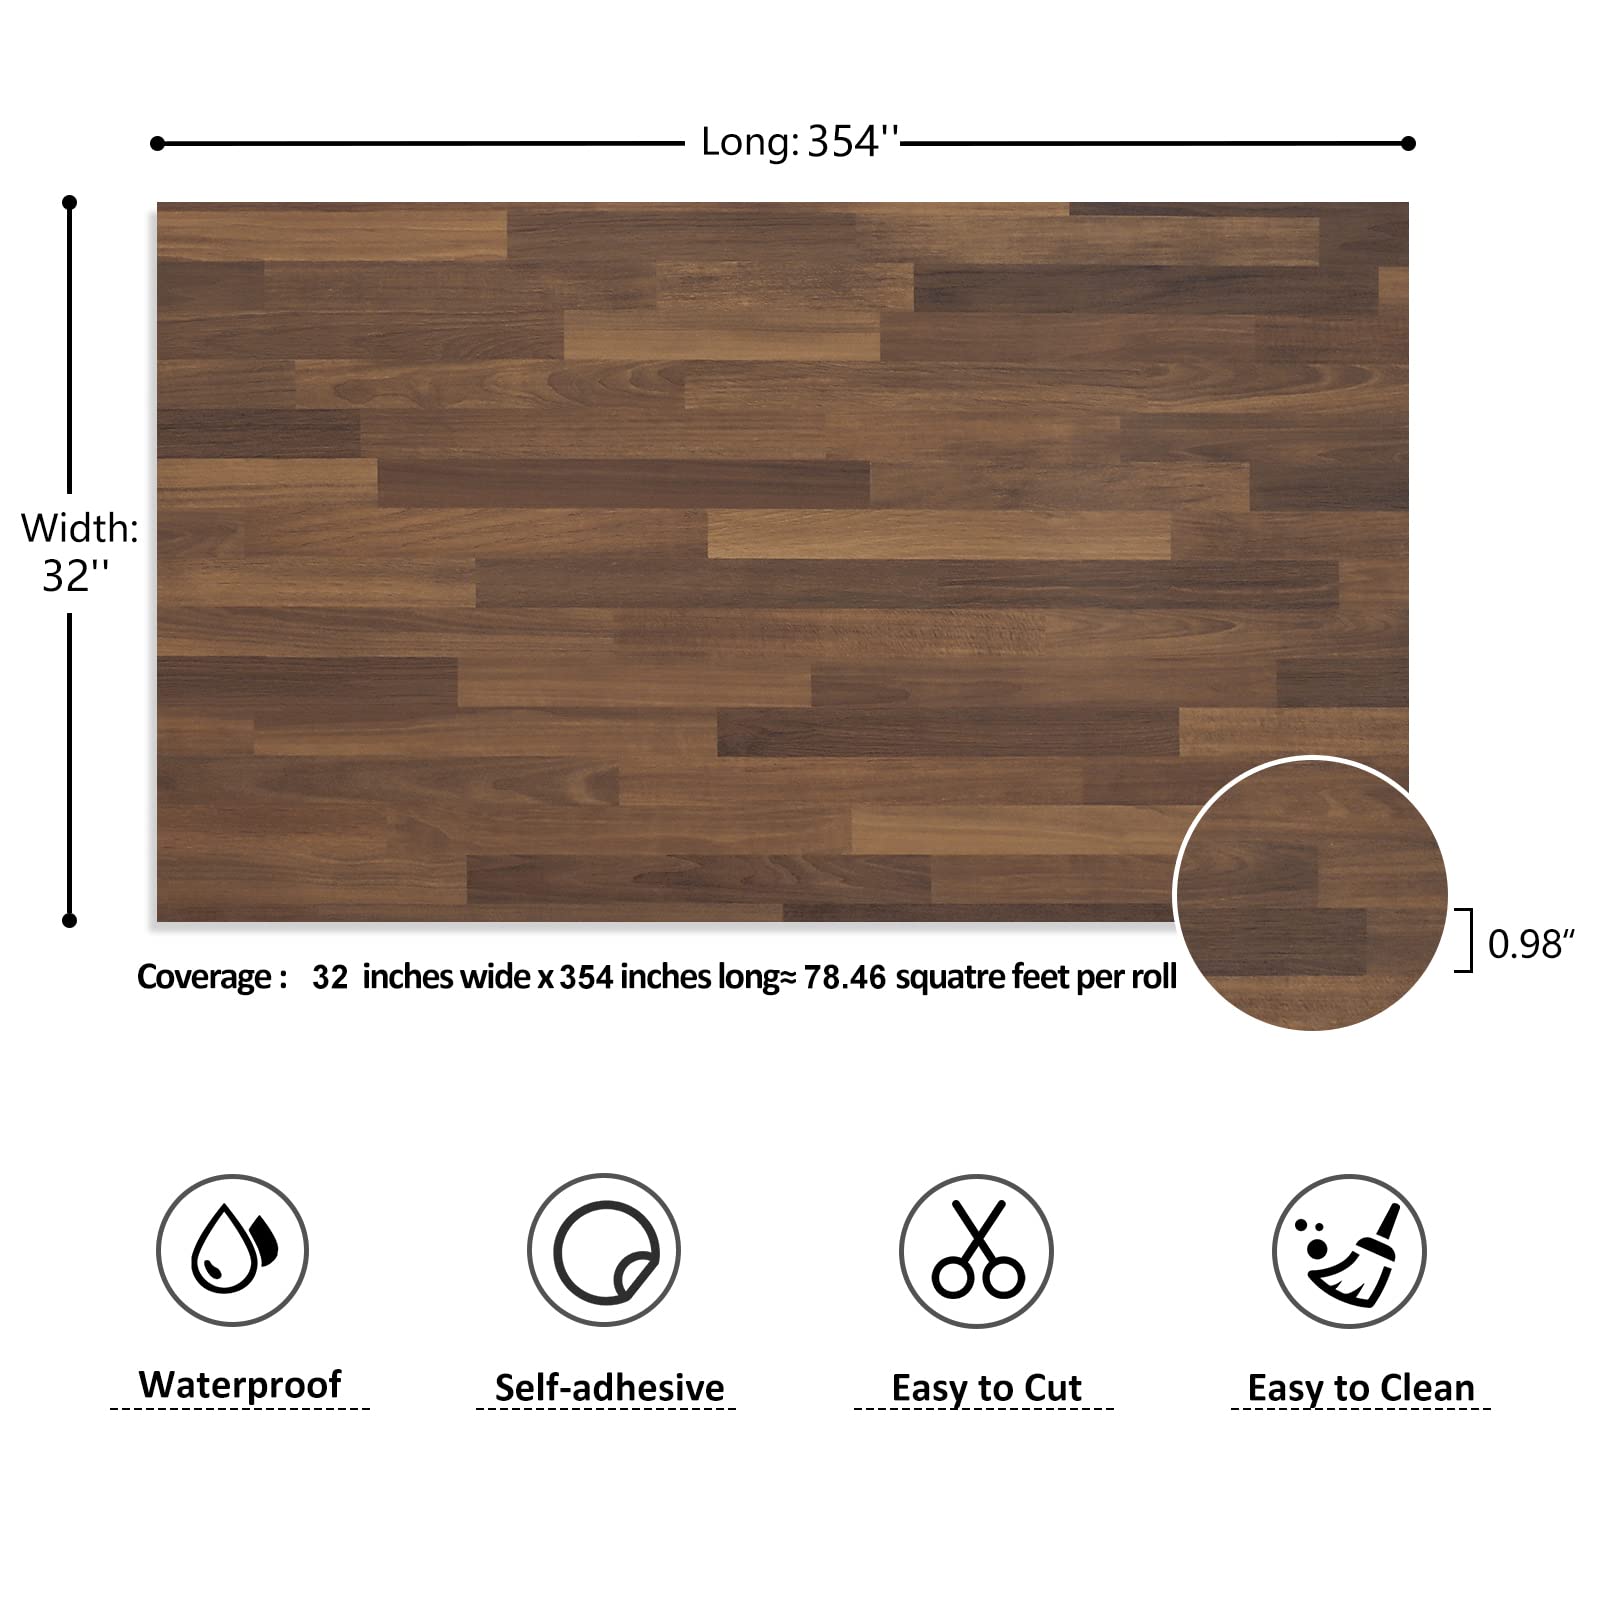 VEELIKE Large Size Butcher Block Contact Paper Peel and Stick Countertops for Kitchen 32''x354'' Removable Thick Wood Wallpaper Self Adhesive Wood Grain Contact Paper for Table Cabinets Shelf Liners